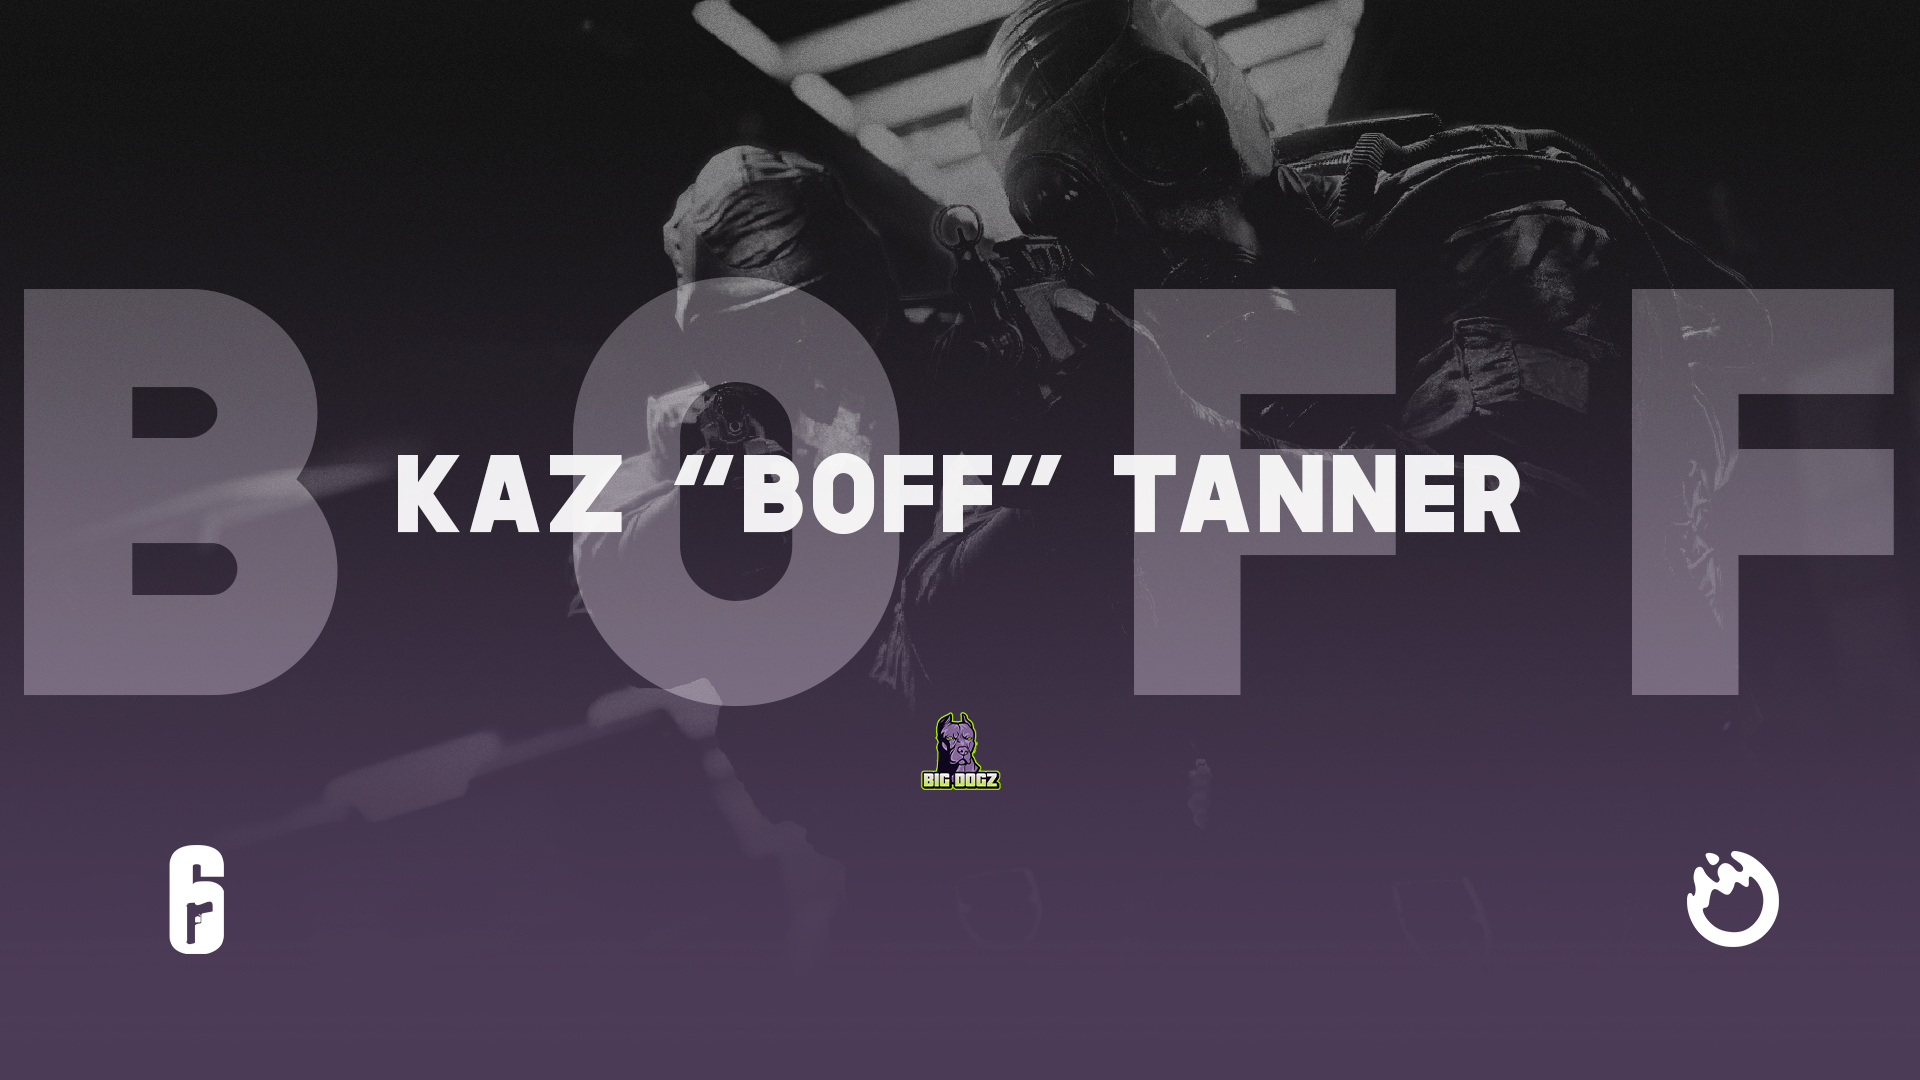 Big Dogz? Underdogs: Boff ready to “dismantle” Wildcard in OCN 2021 Relegations